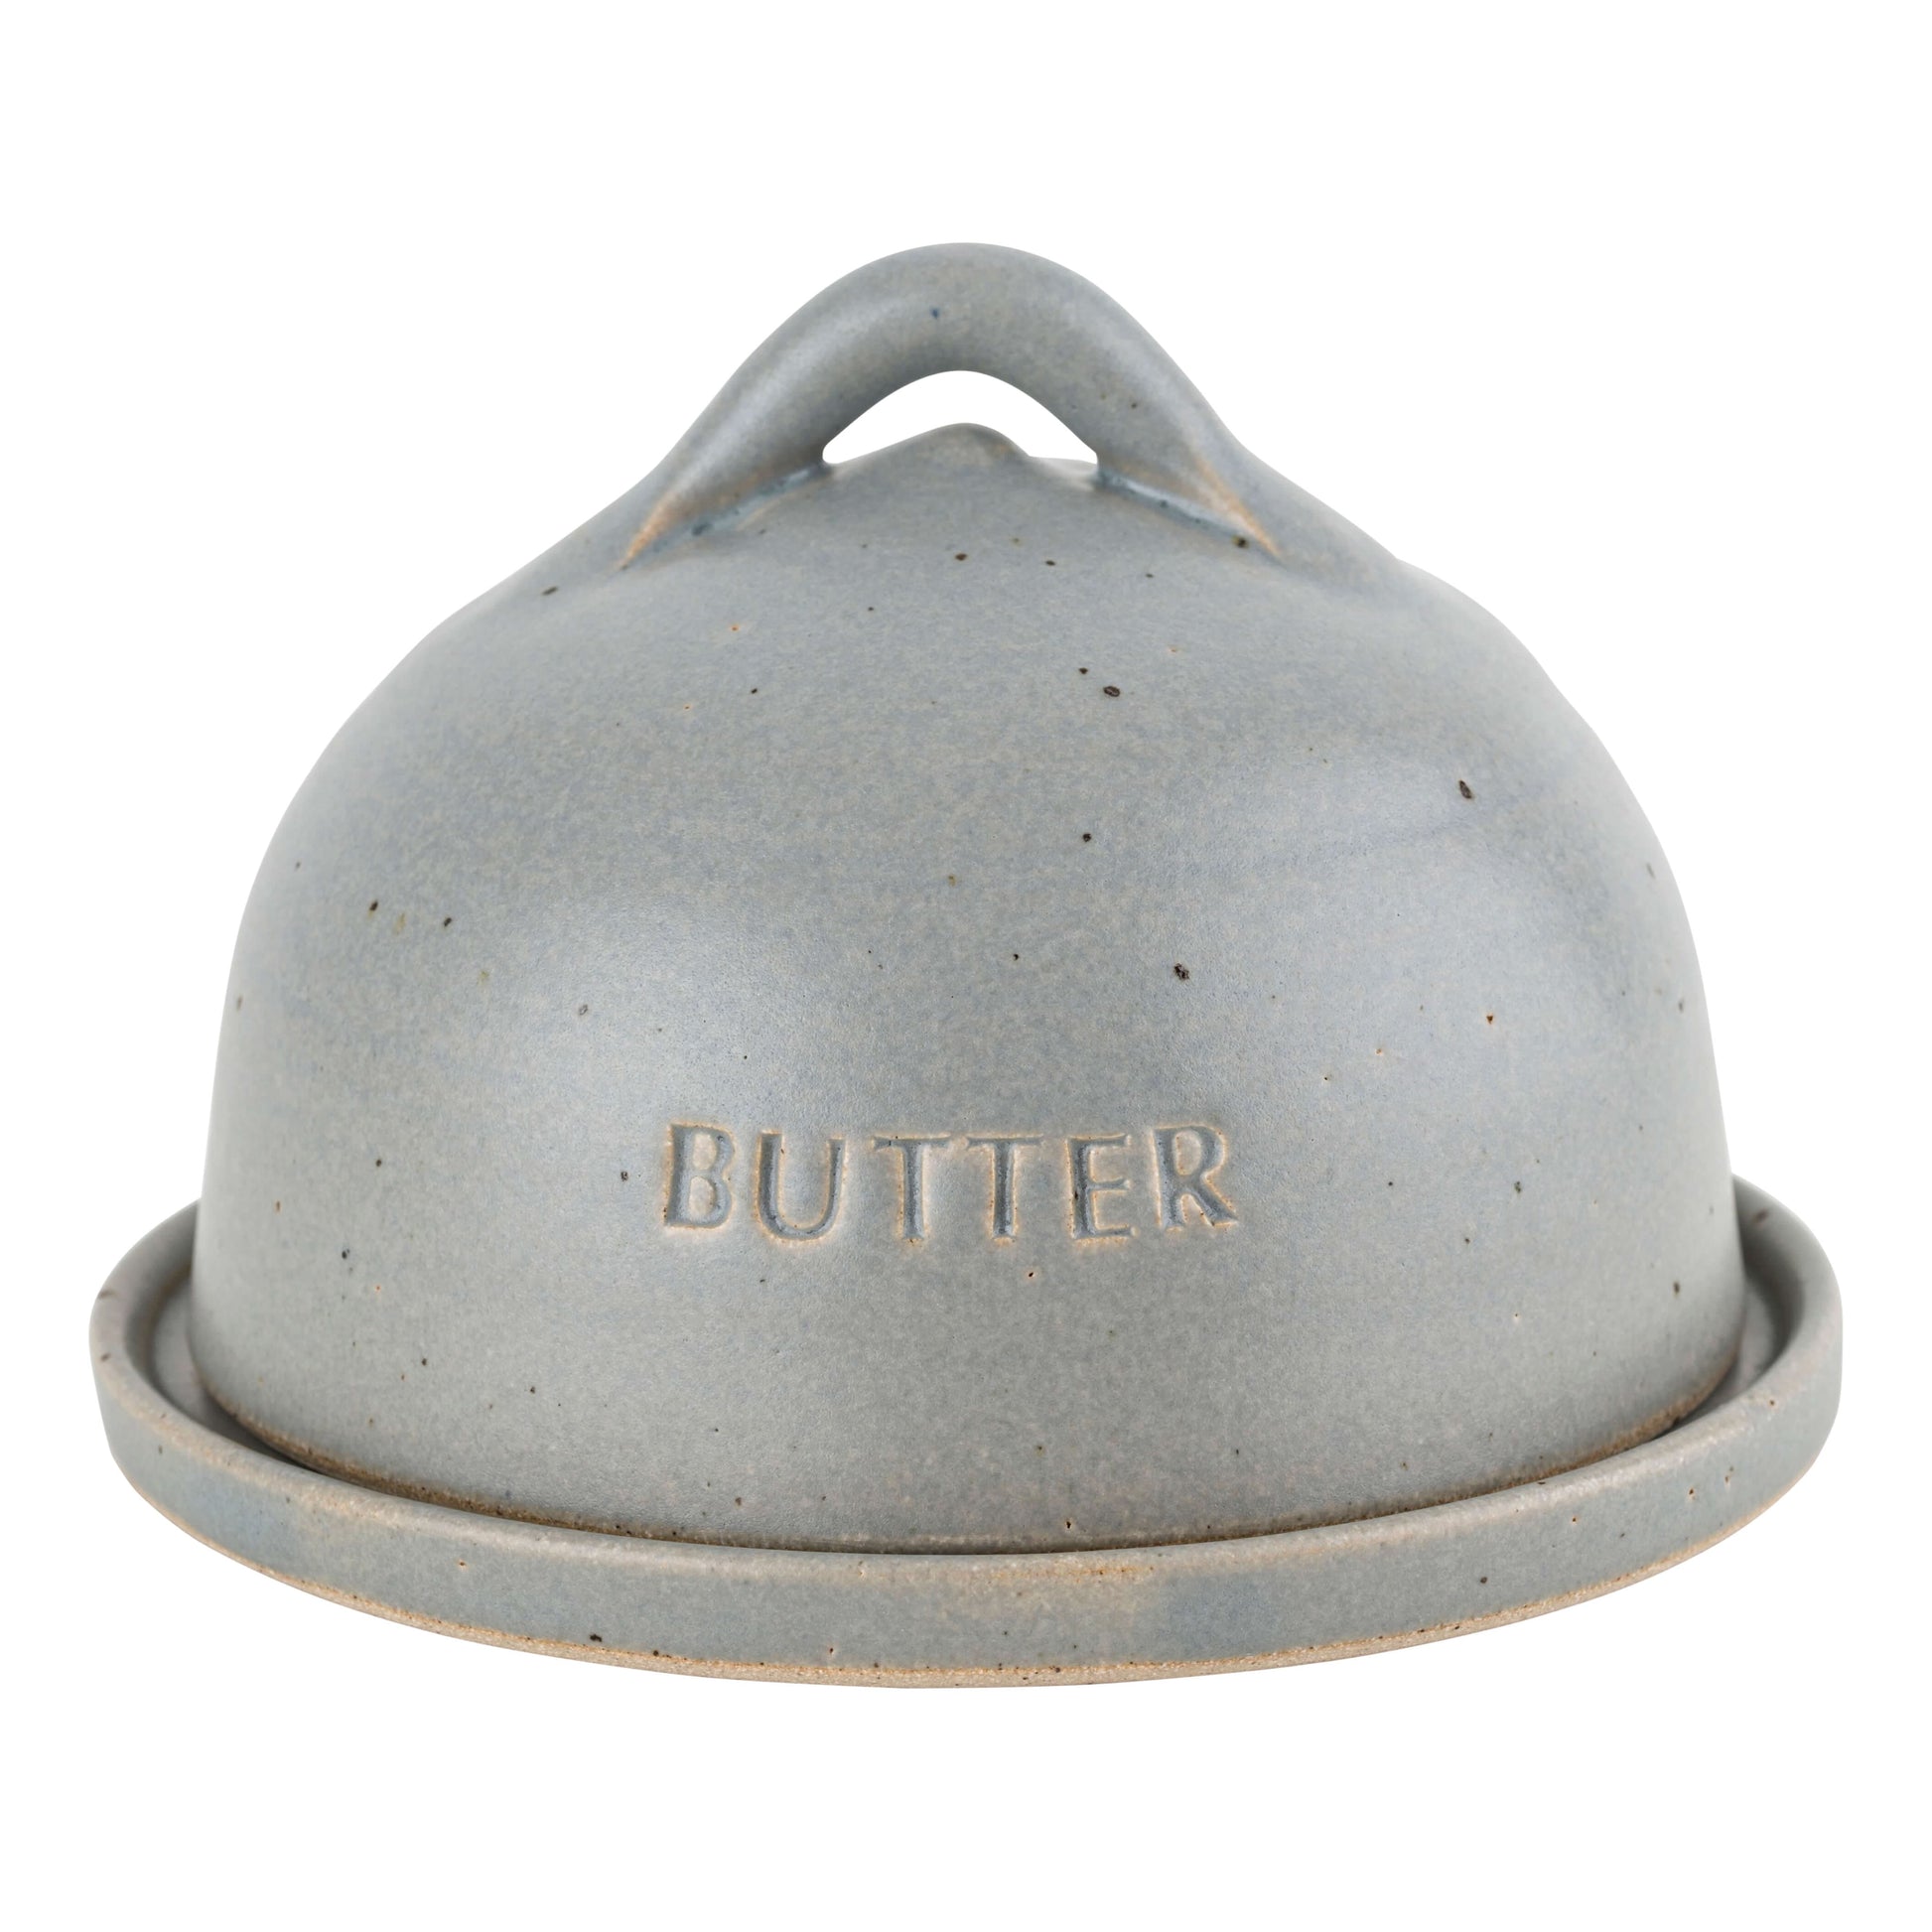 The Village Pottery Satin Grey Ceramic Butter Dish (5 colour options)